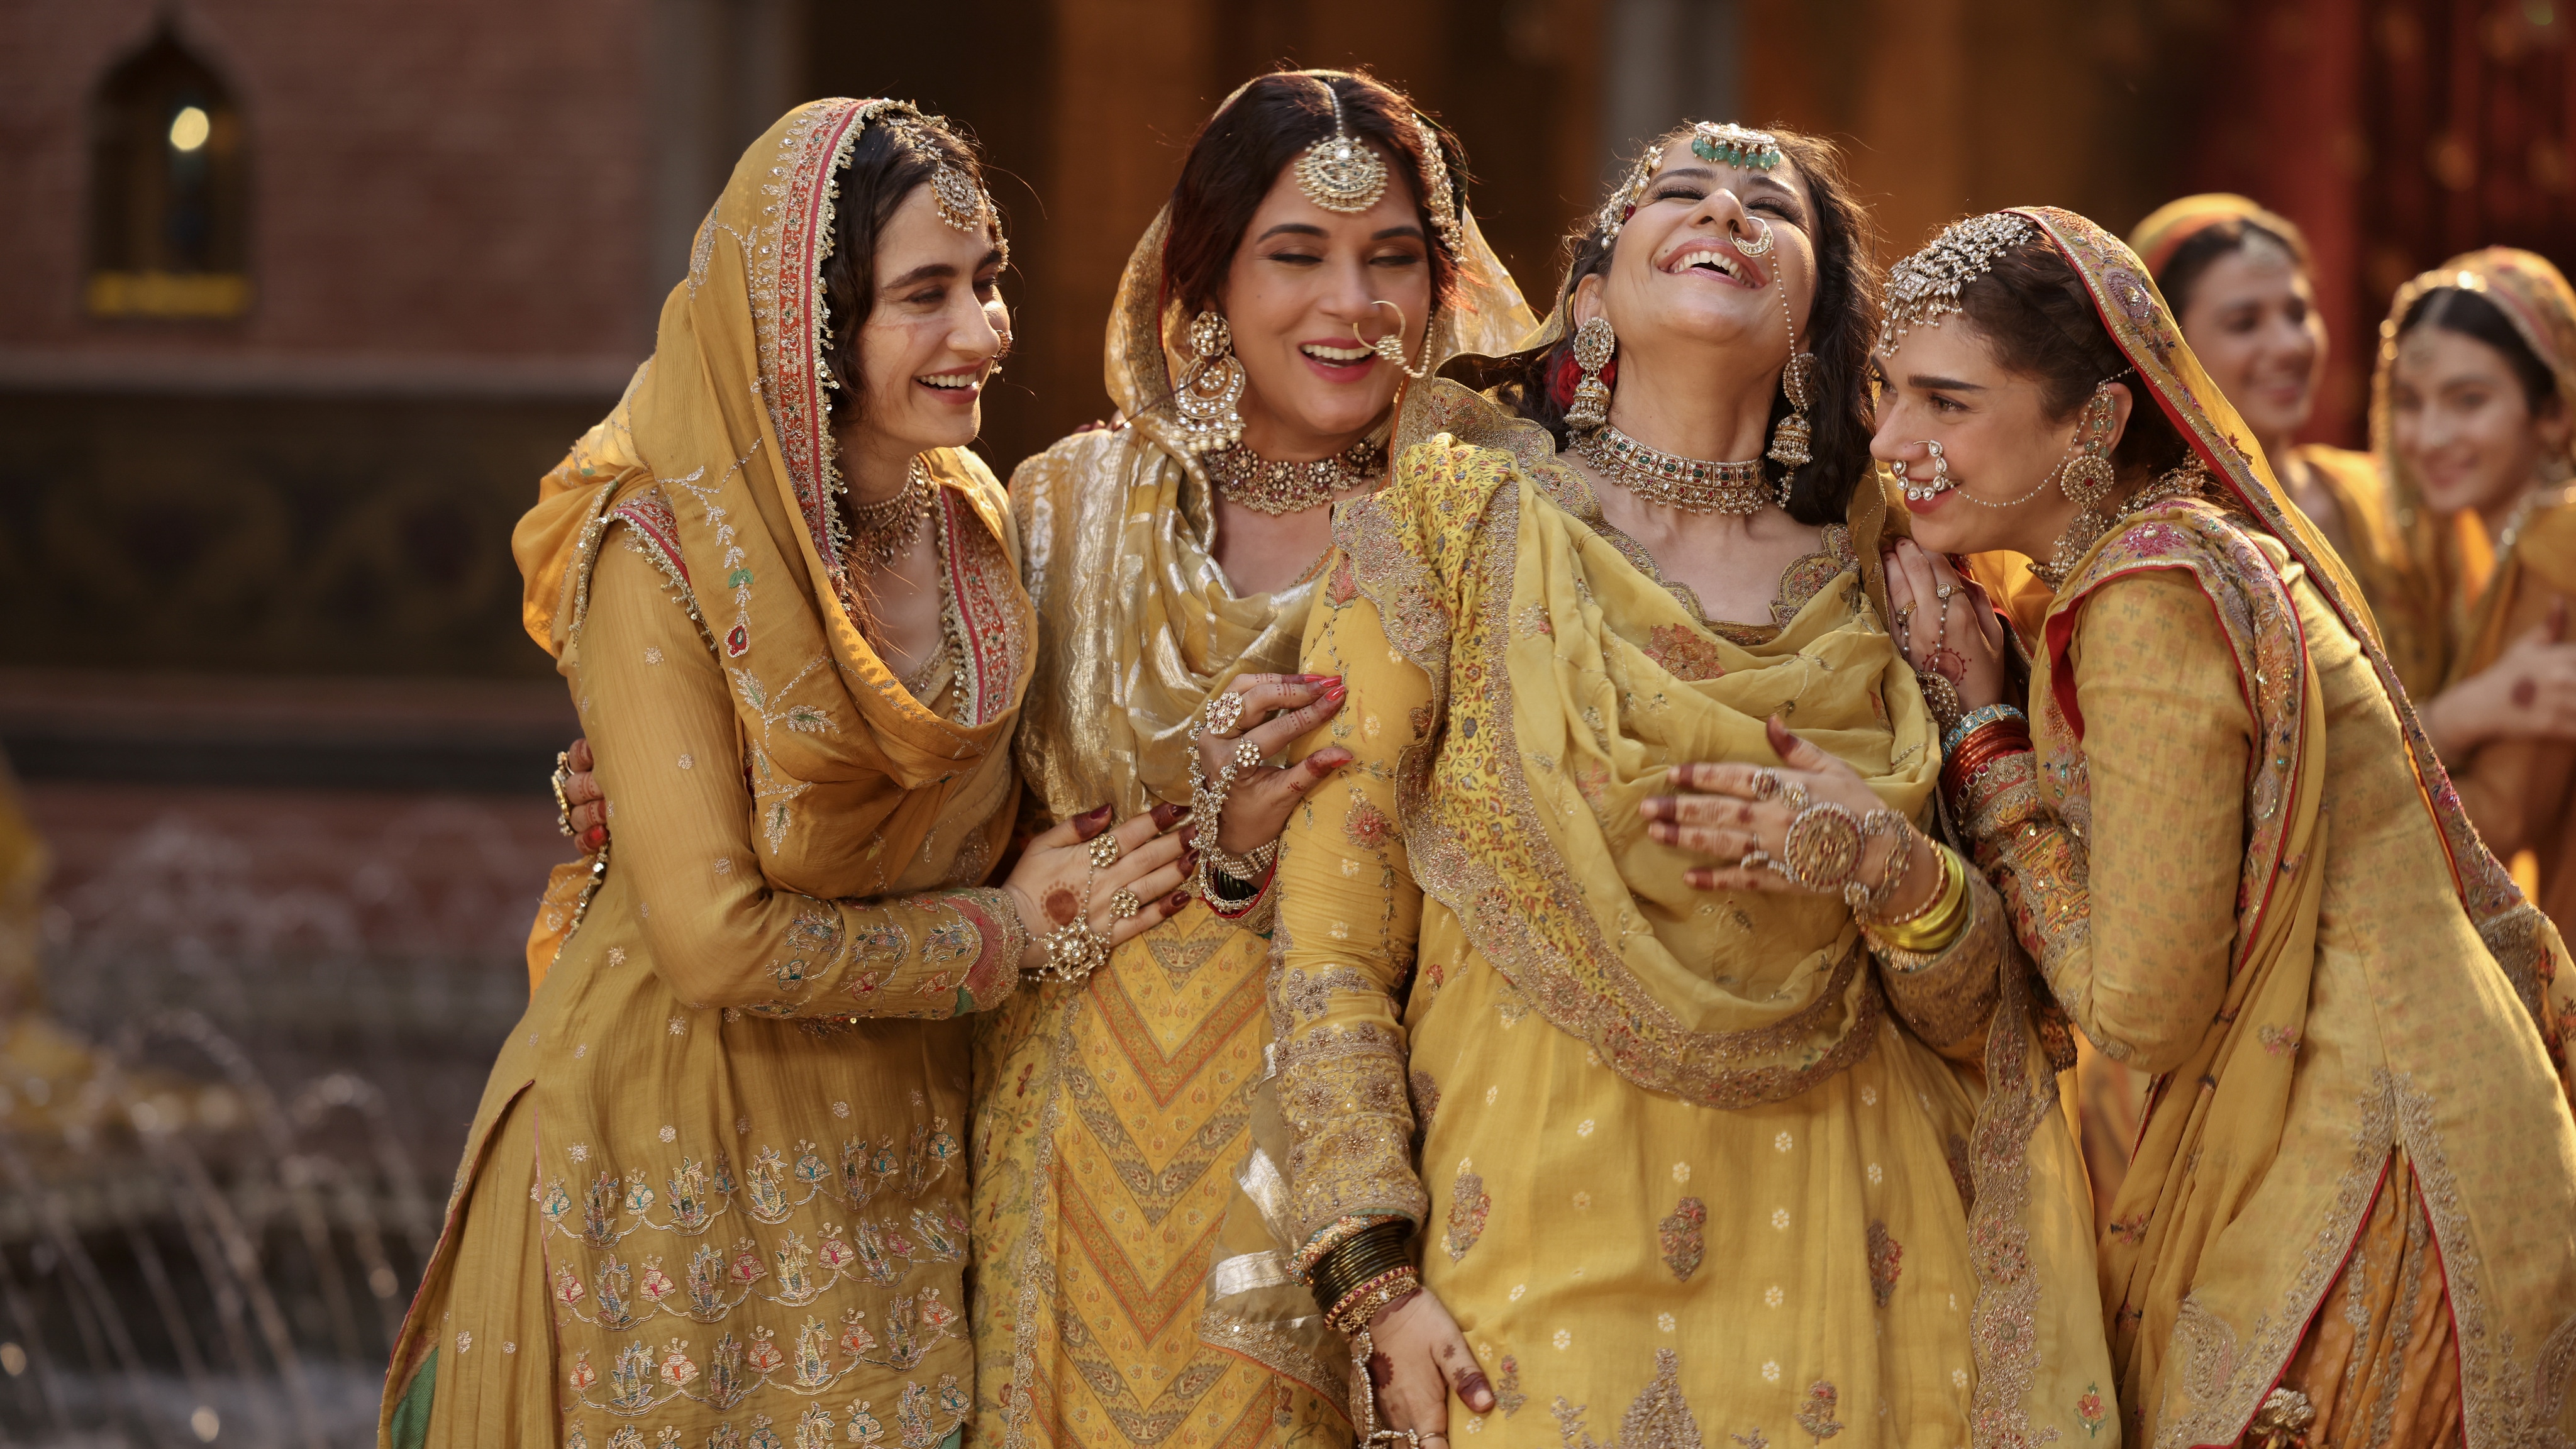 heeramandi review: sanjay leela bhansali's sprawling, sparkling debut show is blissfully free of his cinematic trappings